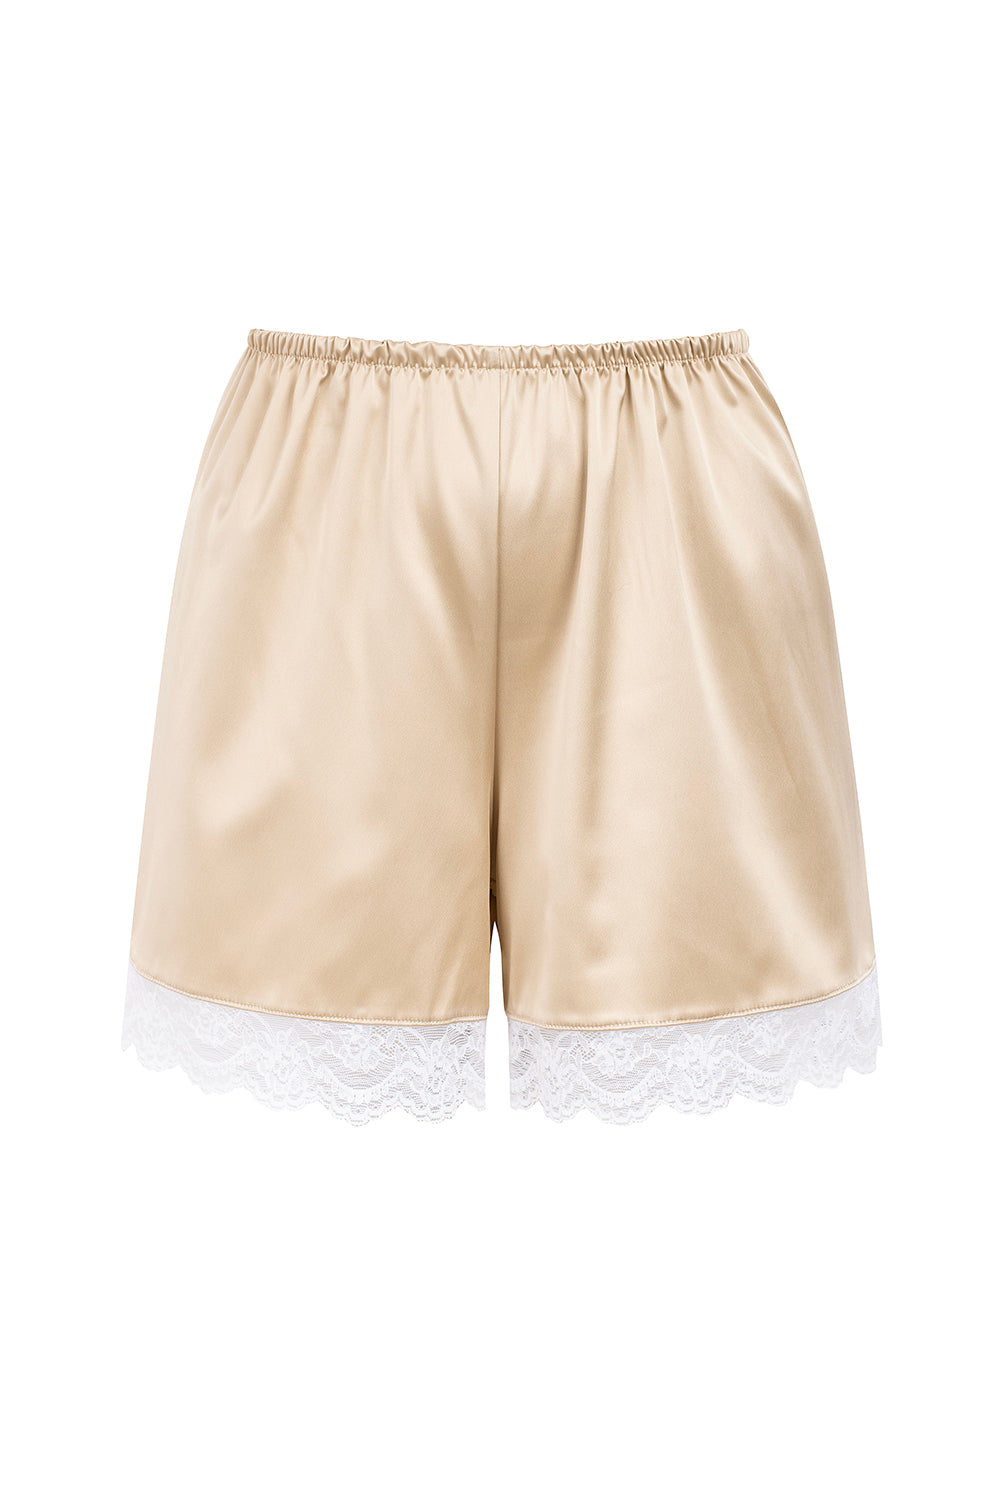 CHAMPAGNE SATIN & LACE SHORTS – Missus